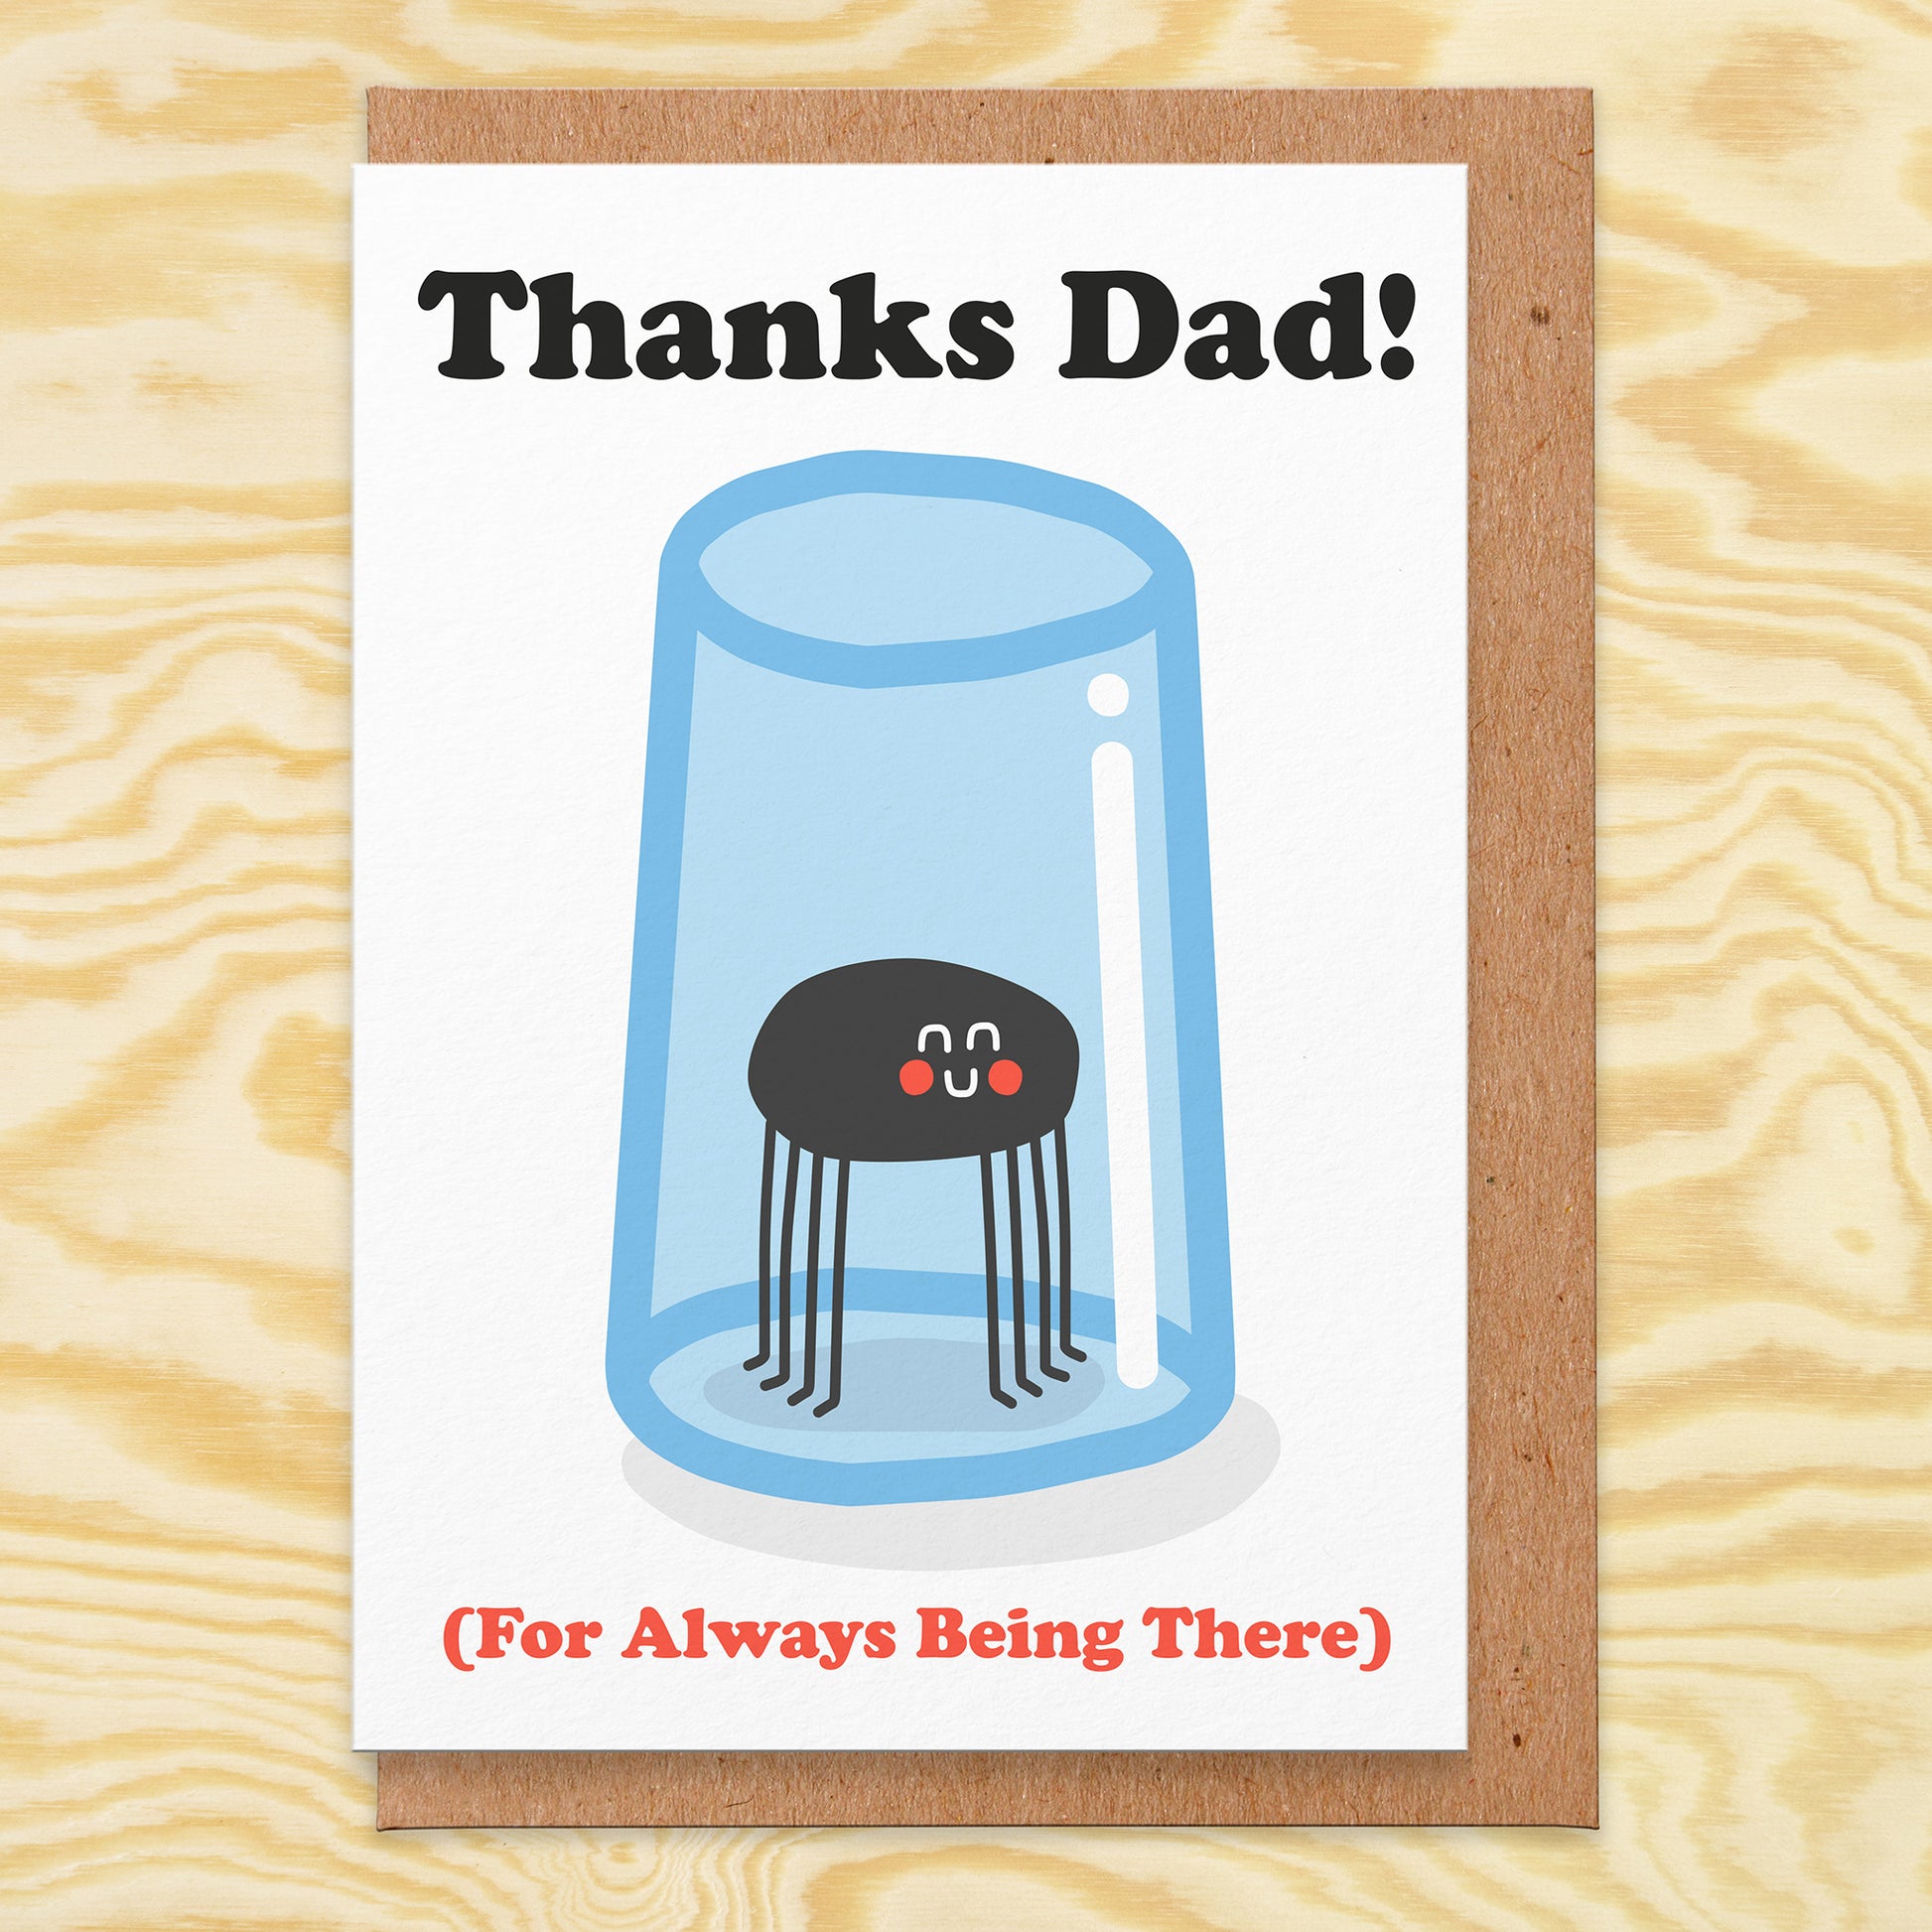 Father's Day card with an illustration of a smiling spider under a glass and reads Thanks Dad! (For Always Being There)